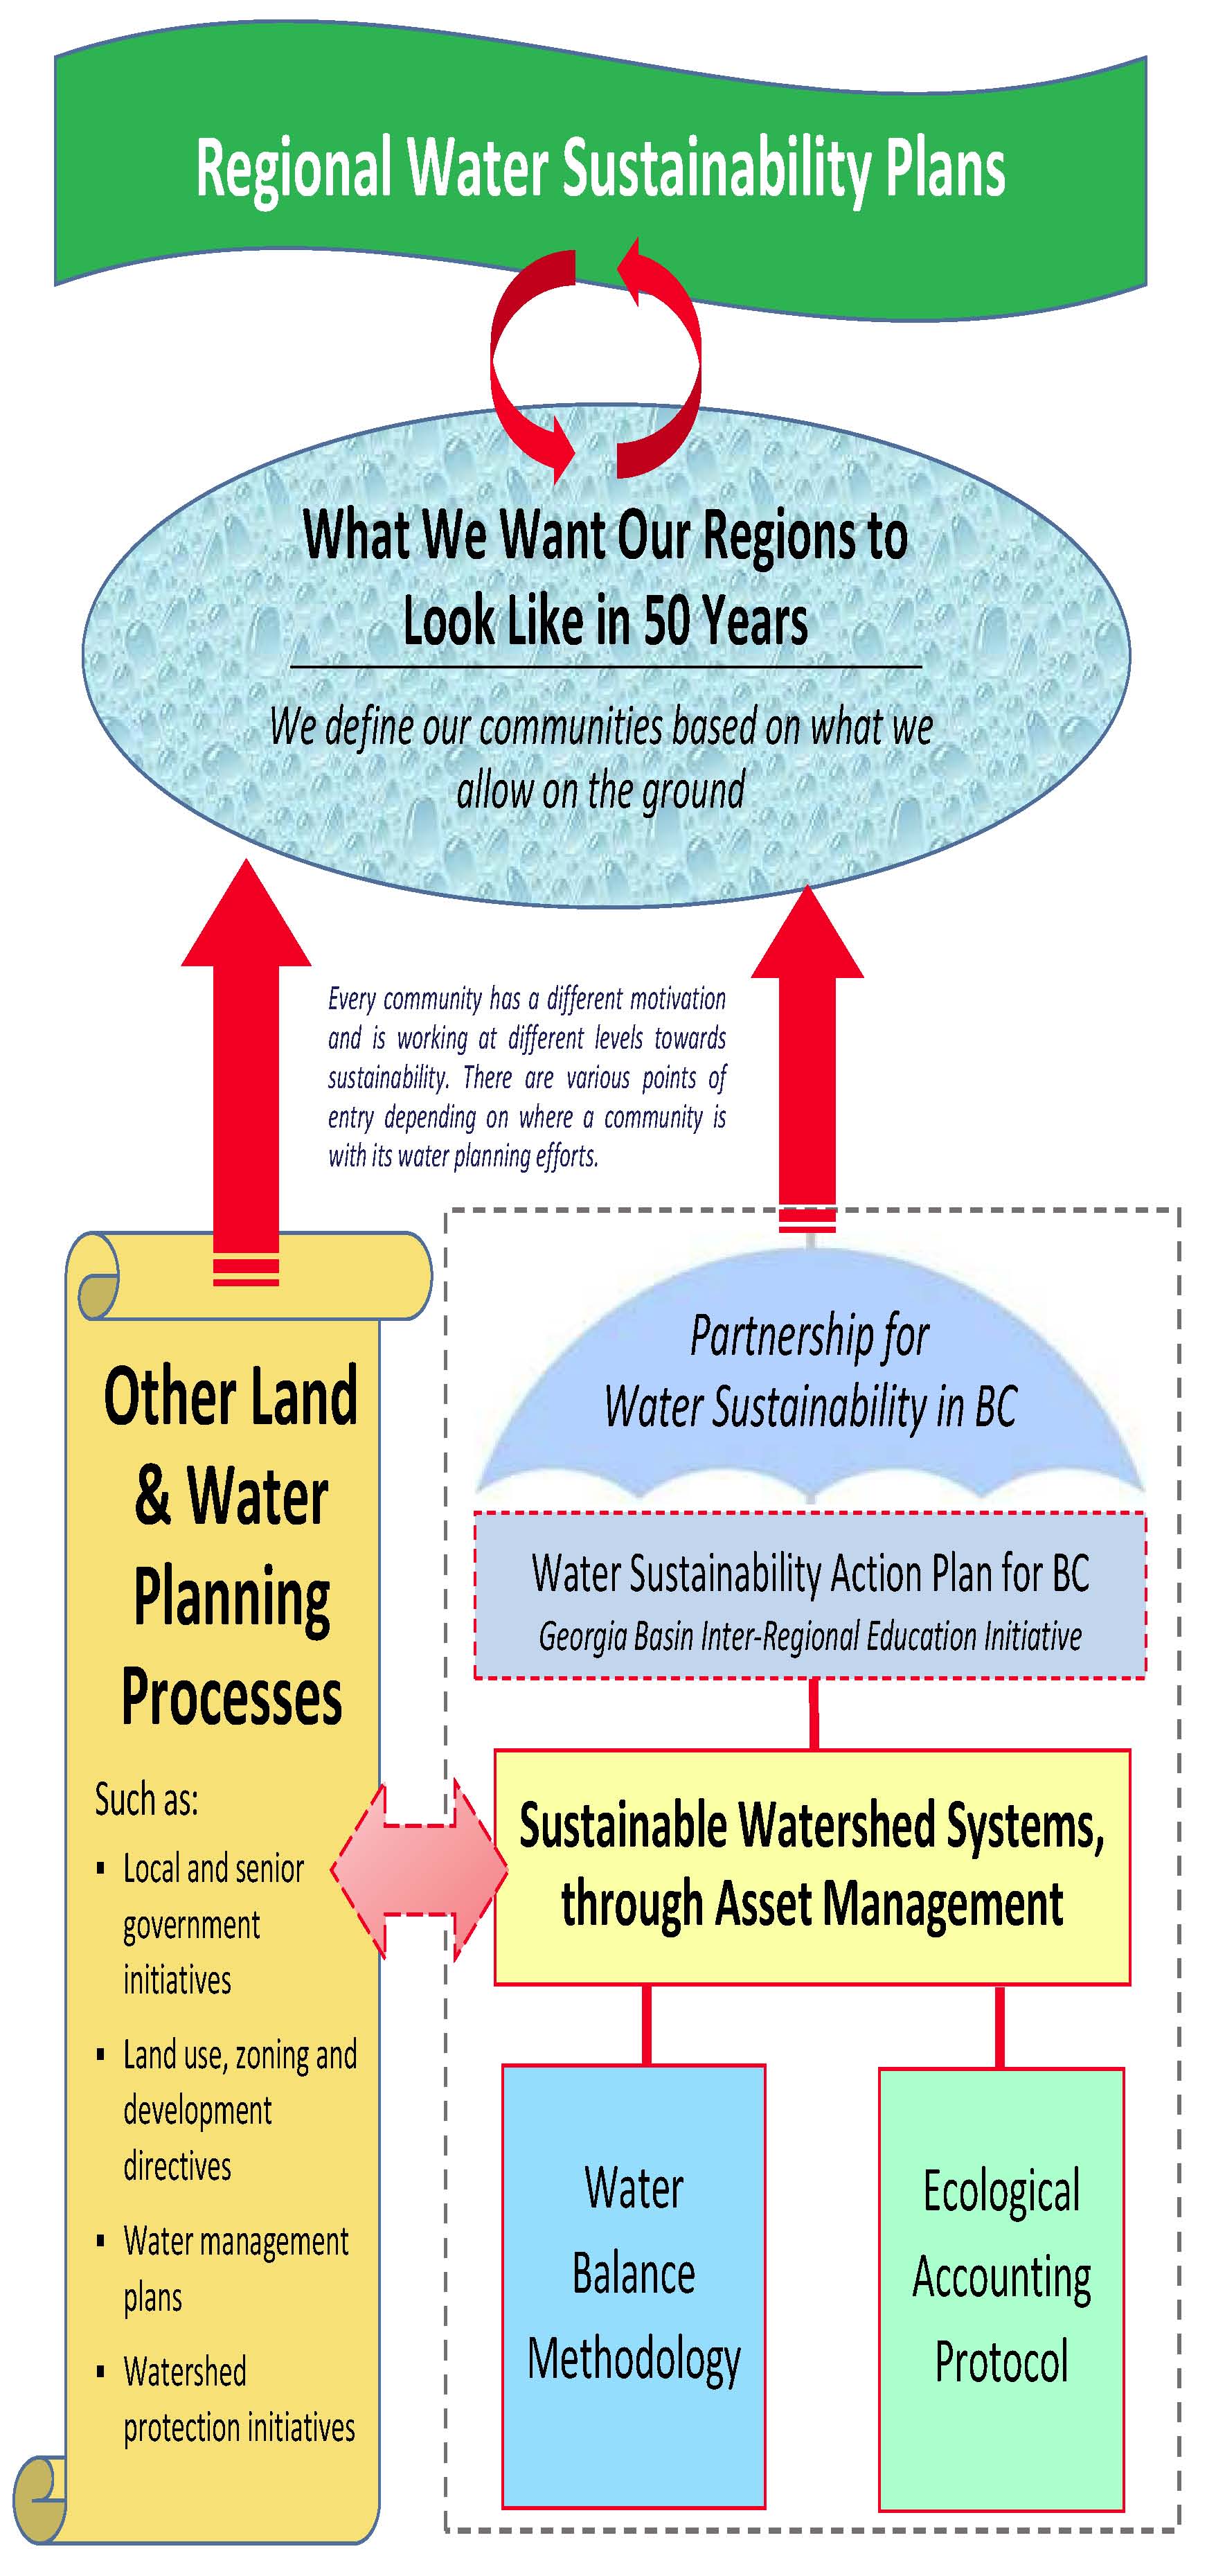 Reference: Figure 60 on page 156 in "Beyond the Guidebook 2015" Click on https://waterbucket.ca/viw/files/2015/11/Beyond-Guidebook-2015_final_Nov.pdf